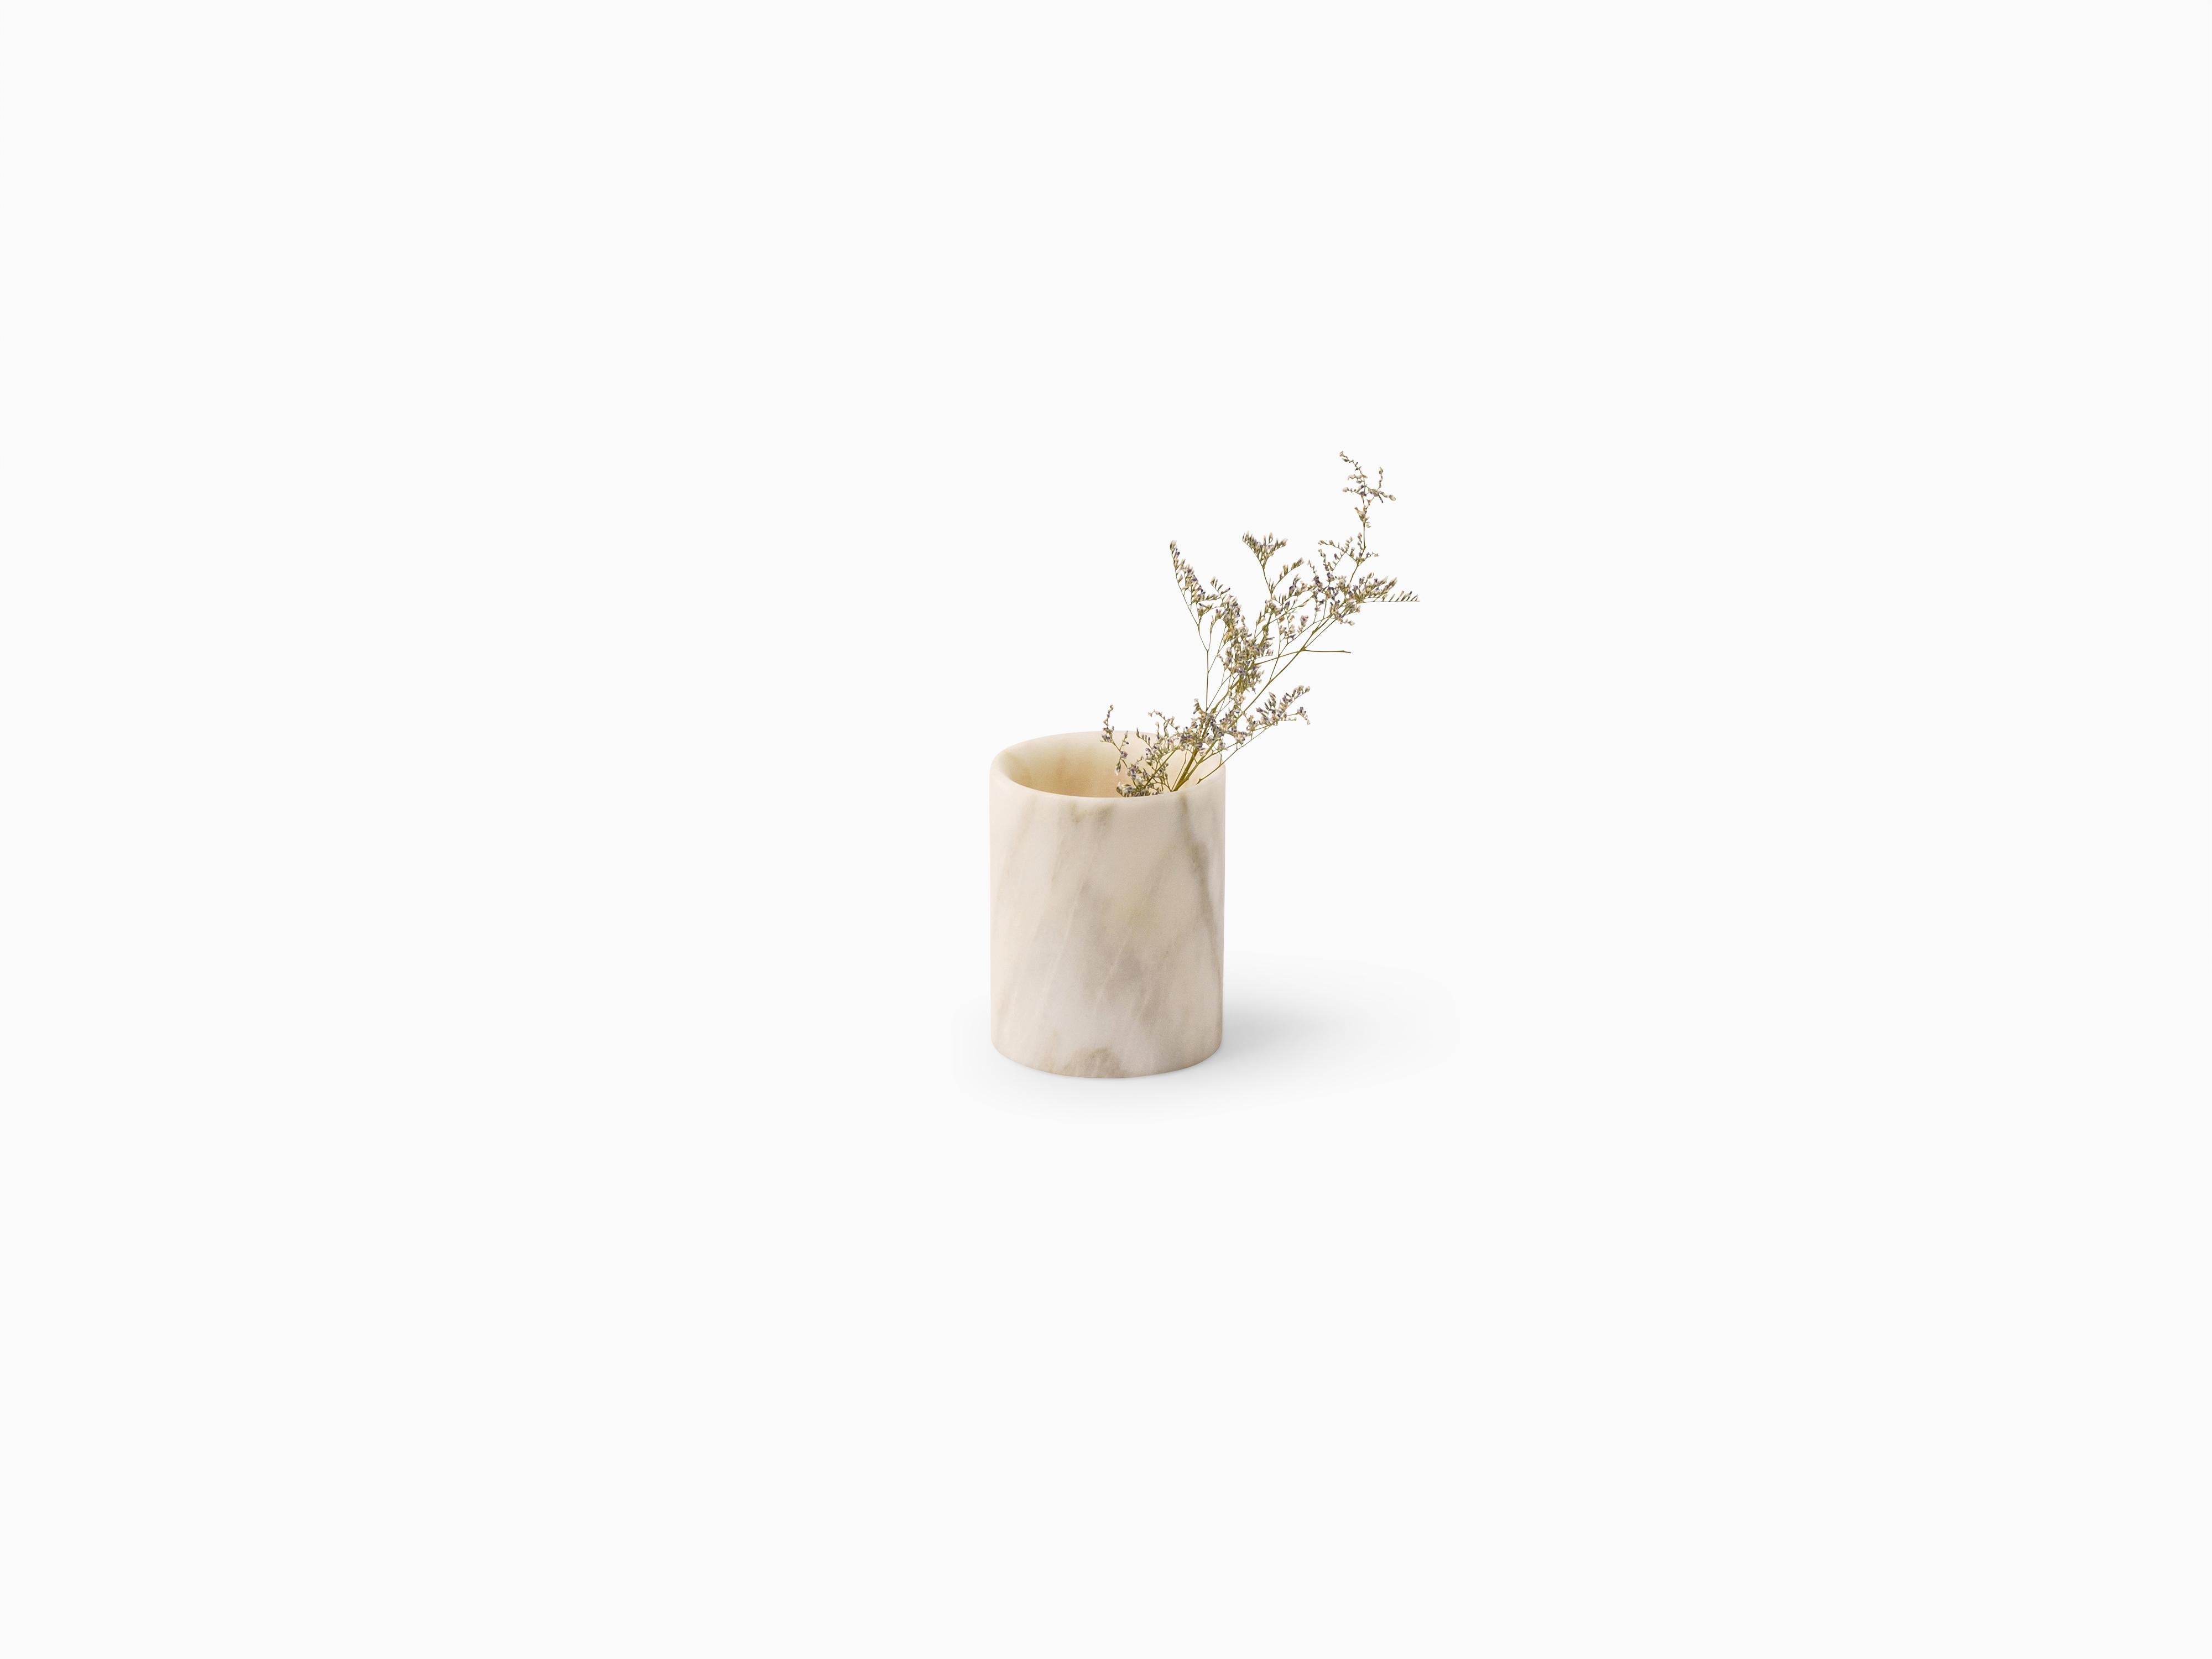 Born of the natural characteristics of Estremoz marble, the AMA vases are an elegant and simple display for fresh flowers, dried botanicals, or faux blooms, among many other uses. Manuel Aires Mateus imagined a vase showing an unexpected material